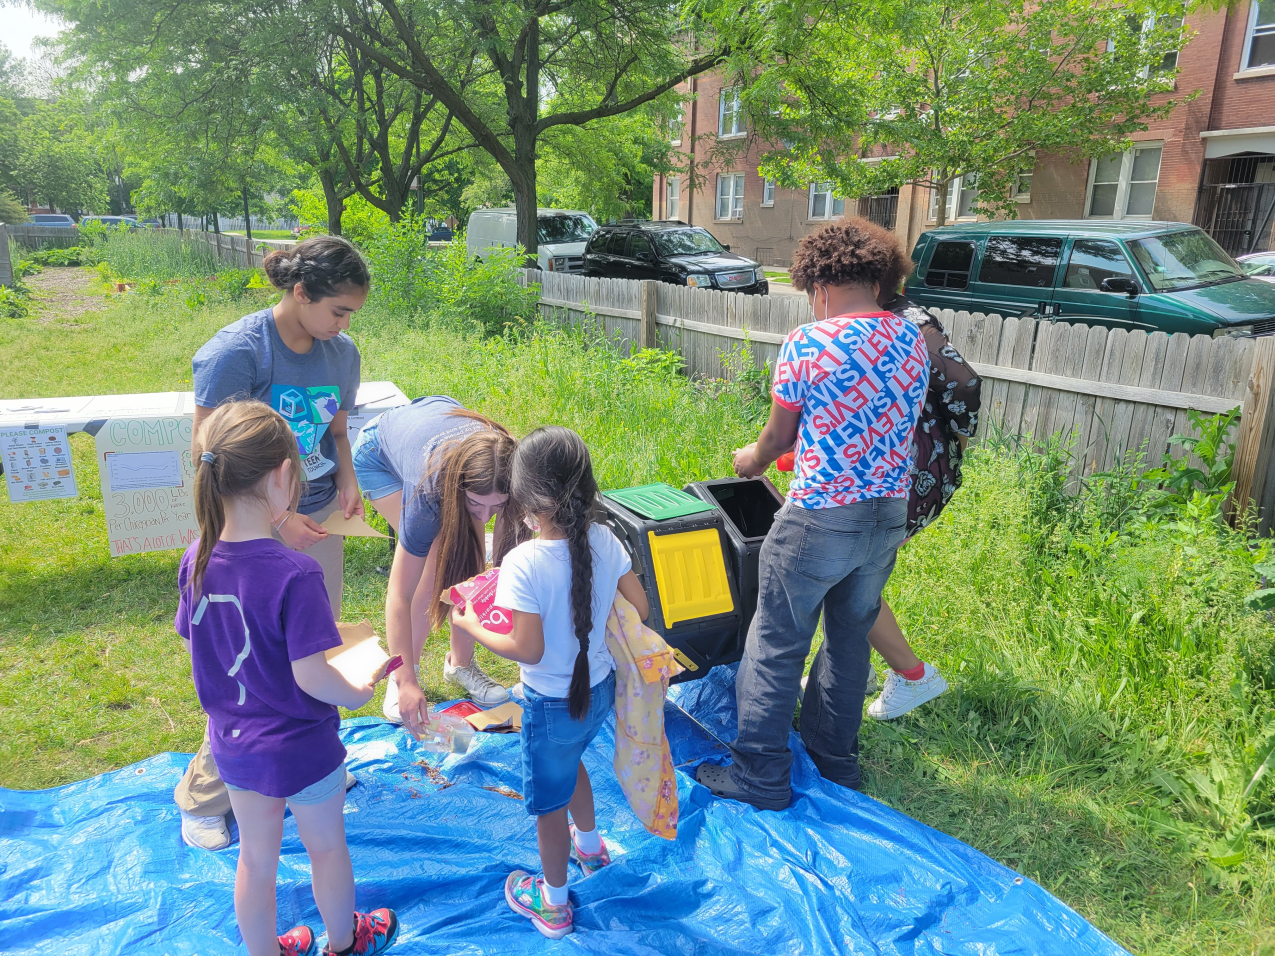 Elementary students watch teens as one gestures toward plastic compost bins and another sorts through small items on a tarp. They are standing in what appears to be a community garden.